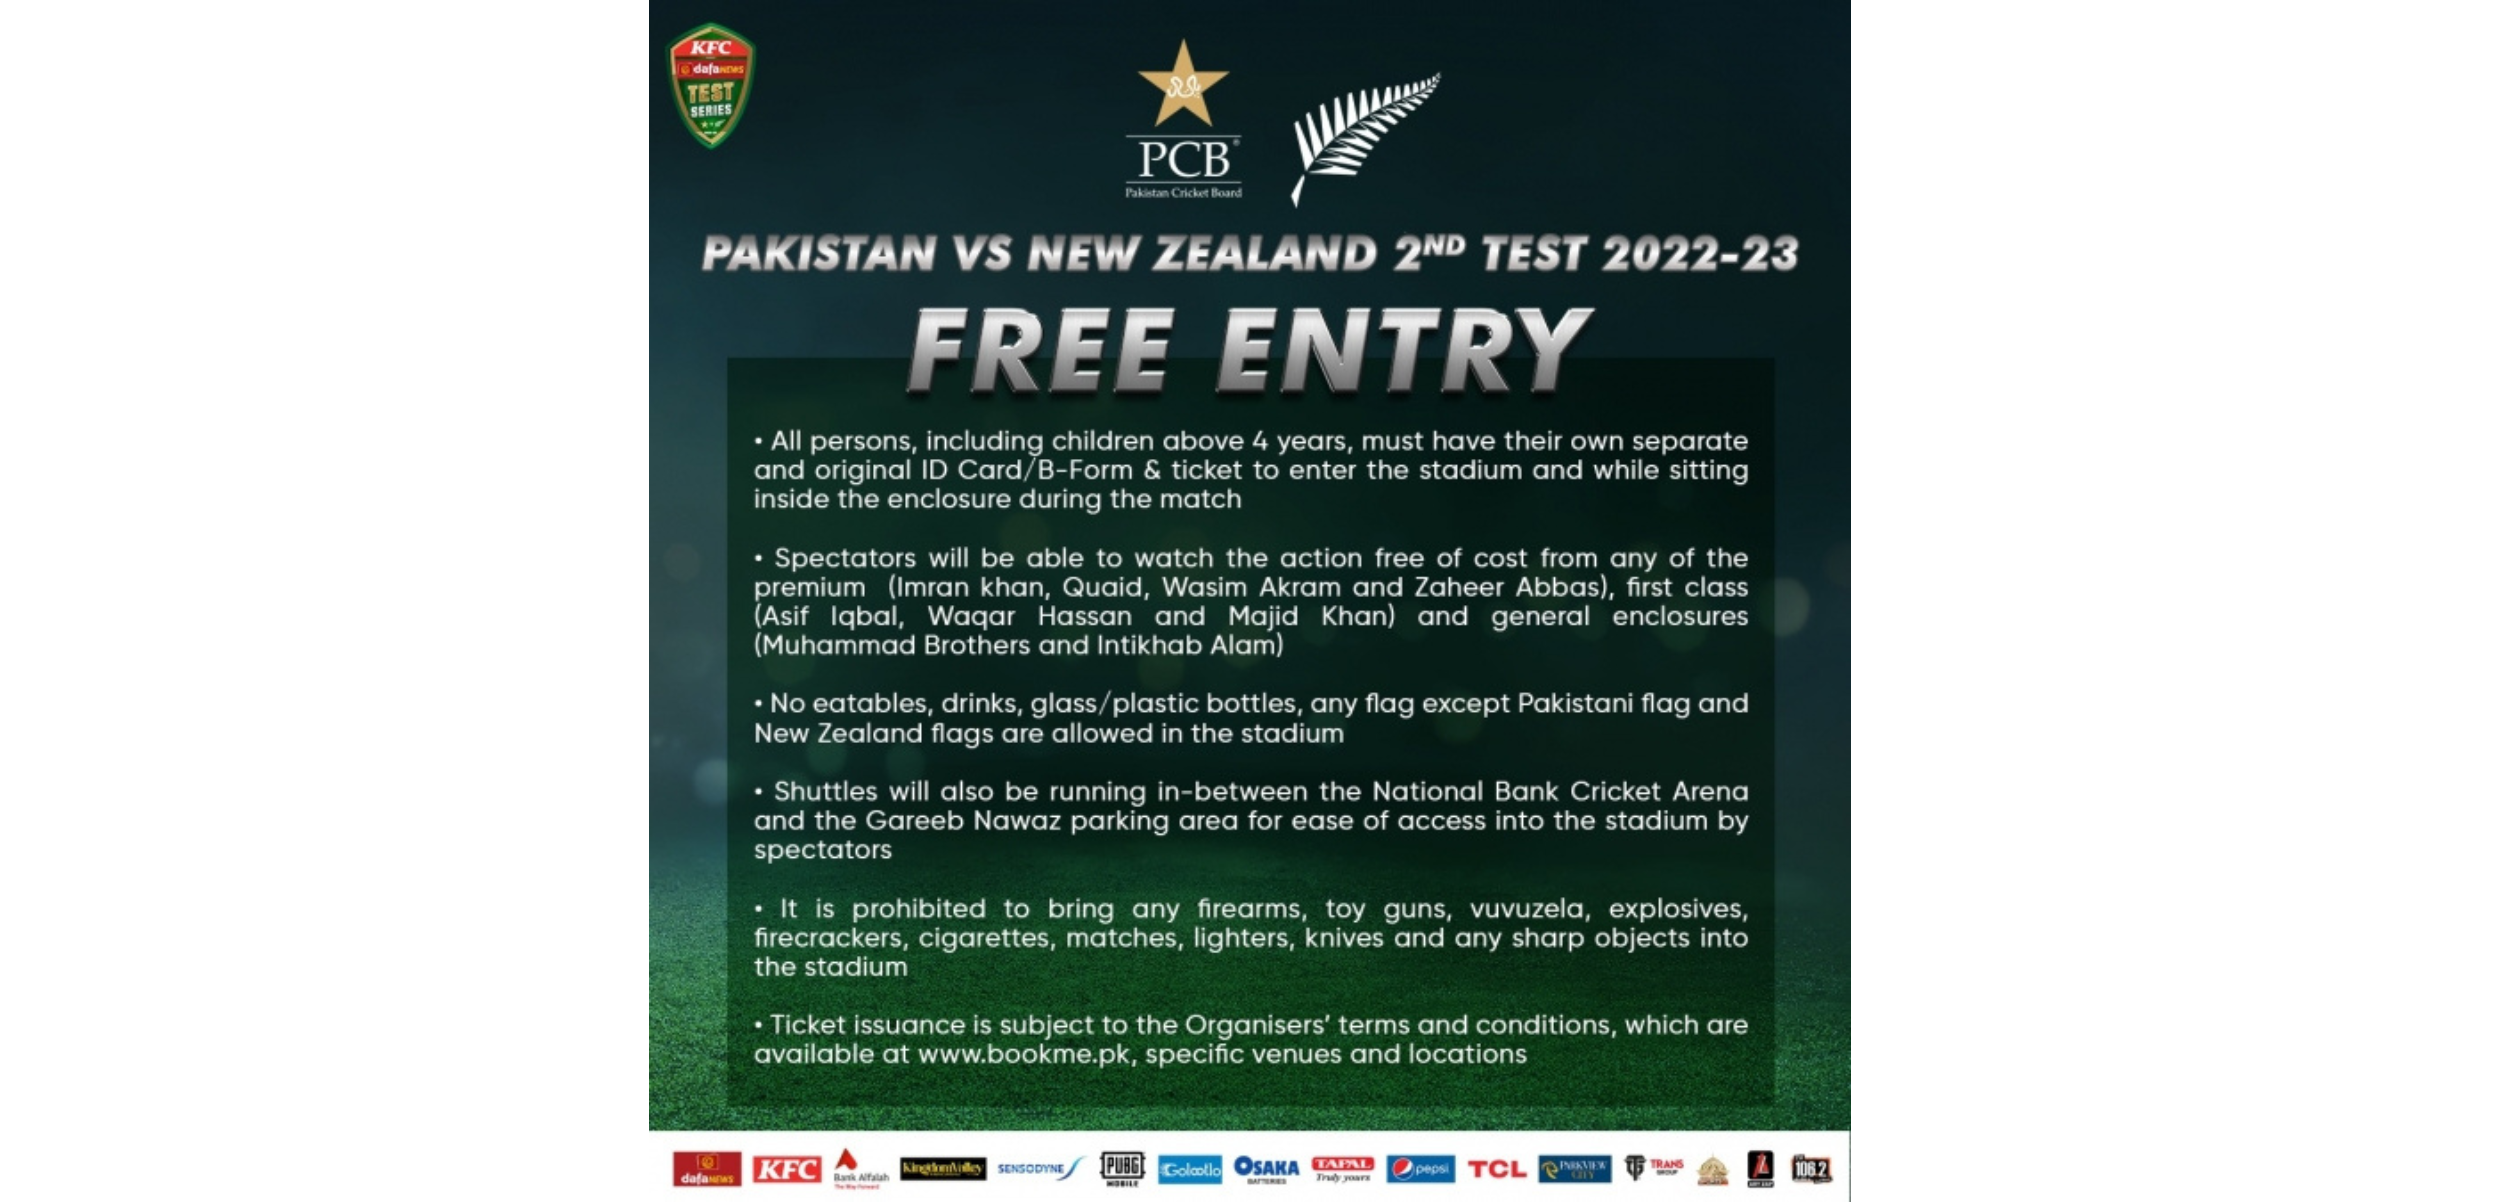 PCB announces free entry for fans for the second Test